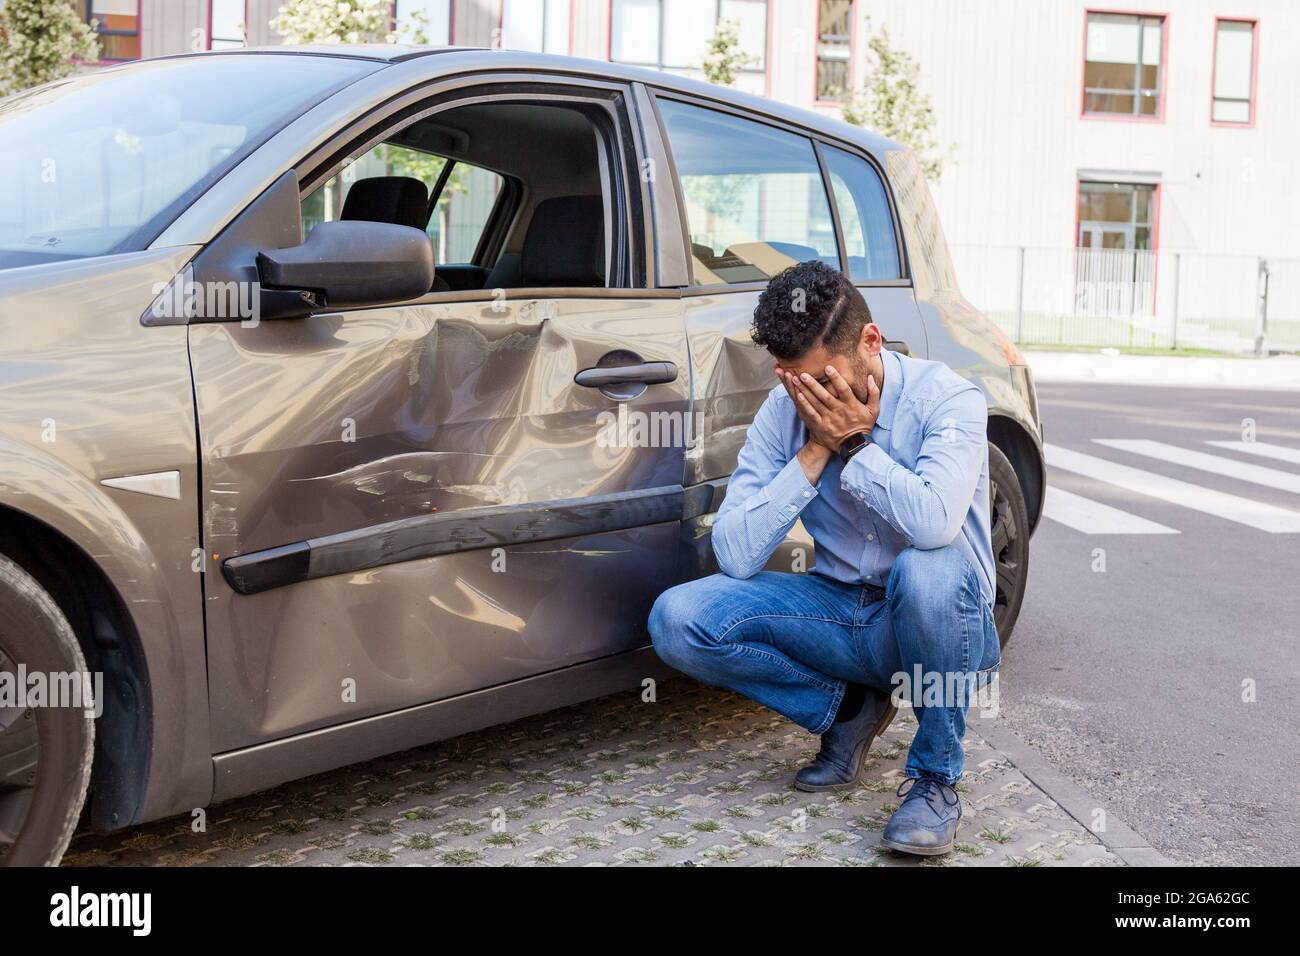 Portrait of man wearing jeans and blue shirt broken his car, being upset and covering his face with palms, dents and scratches on the door of auto, da Stock Photo